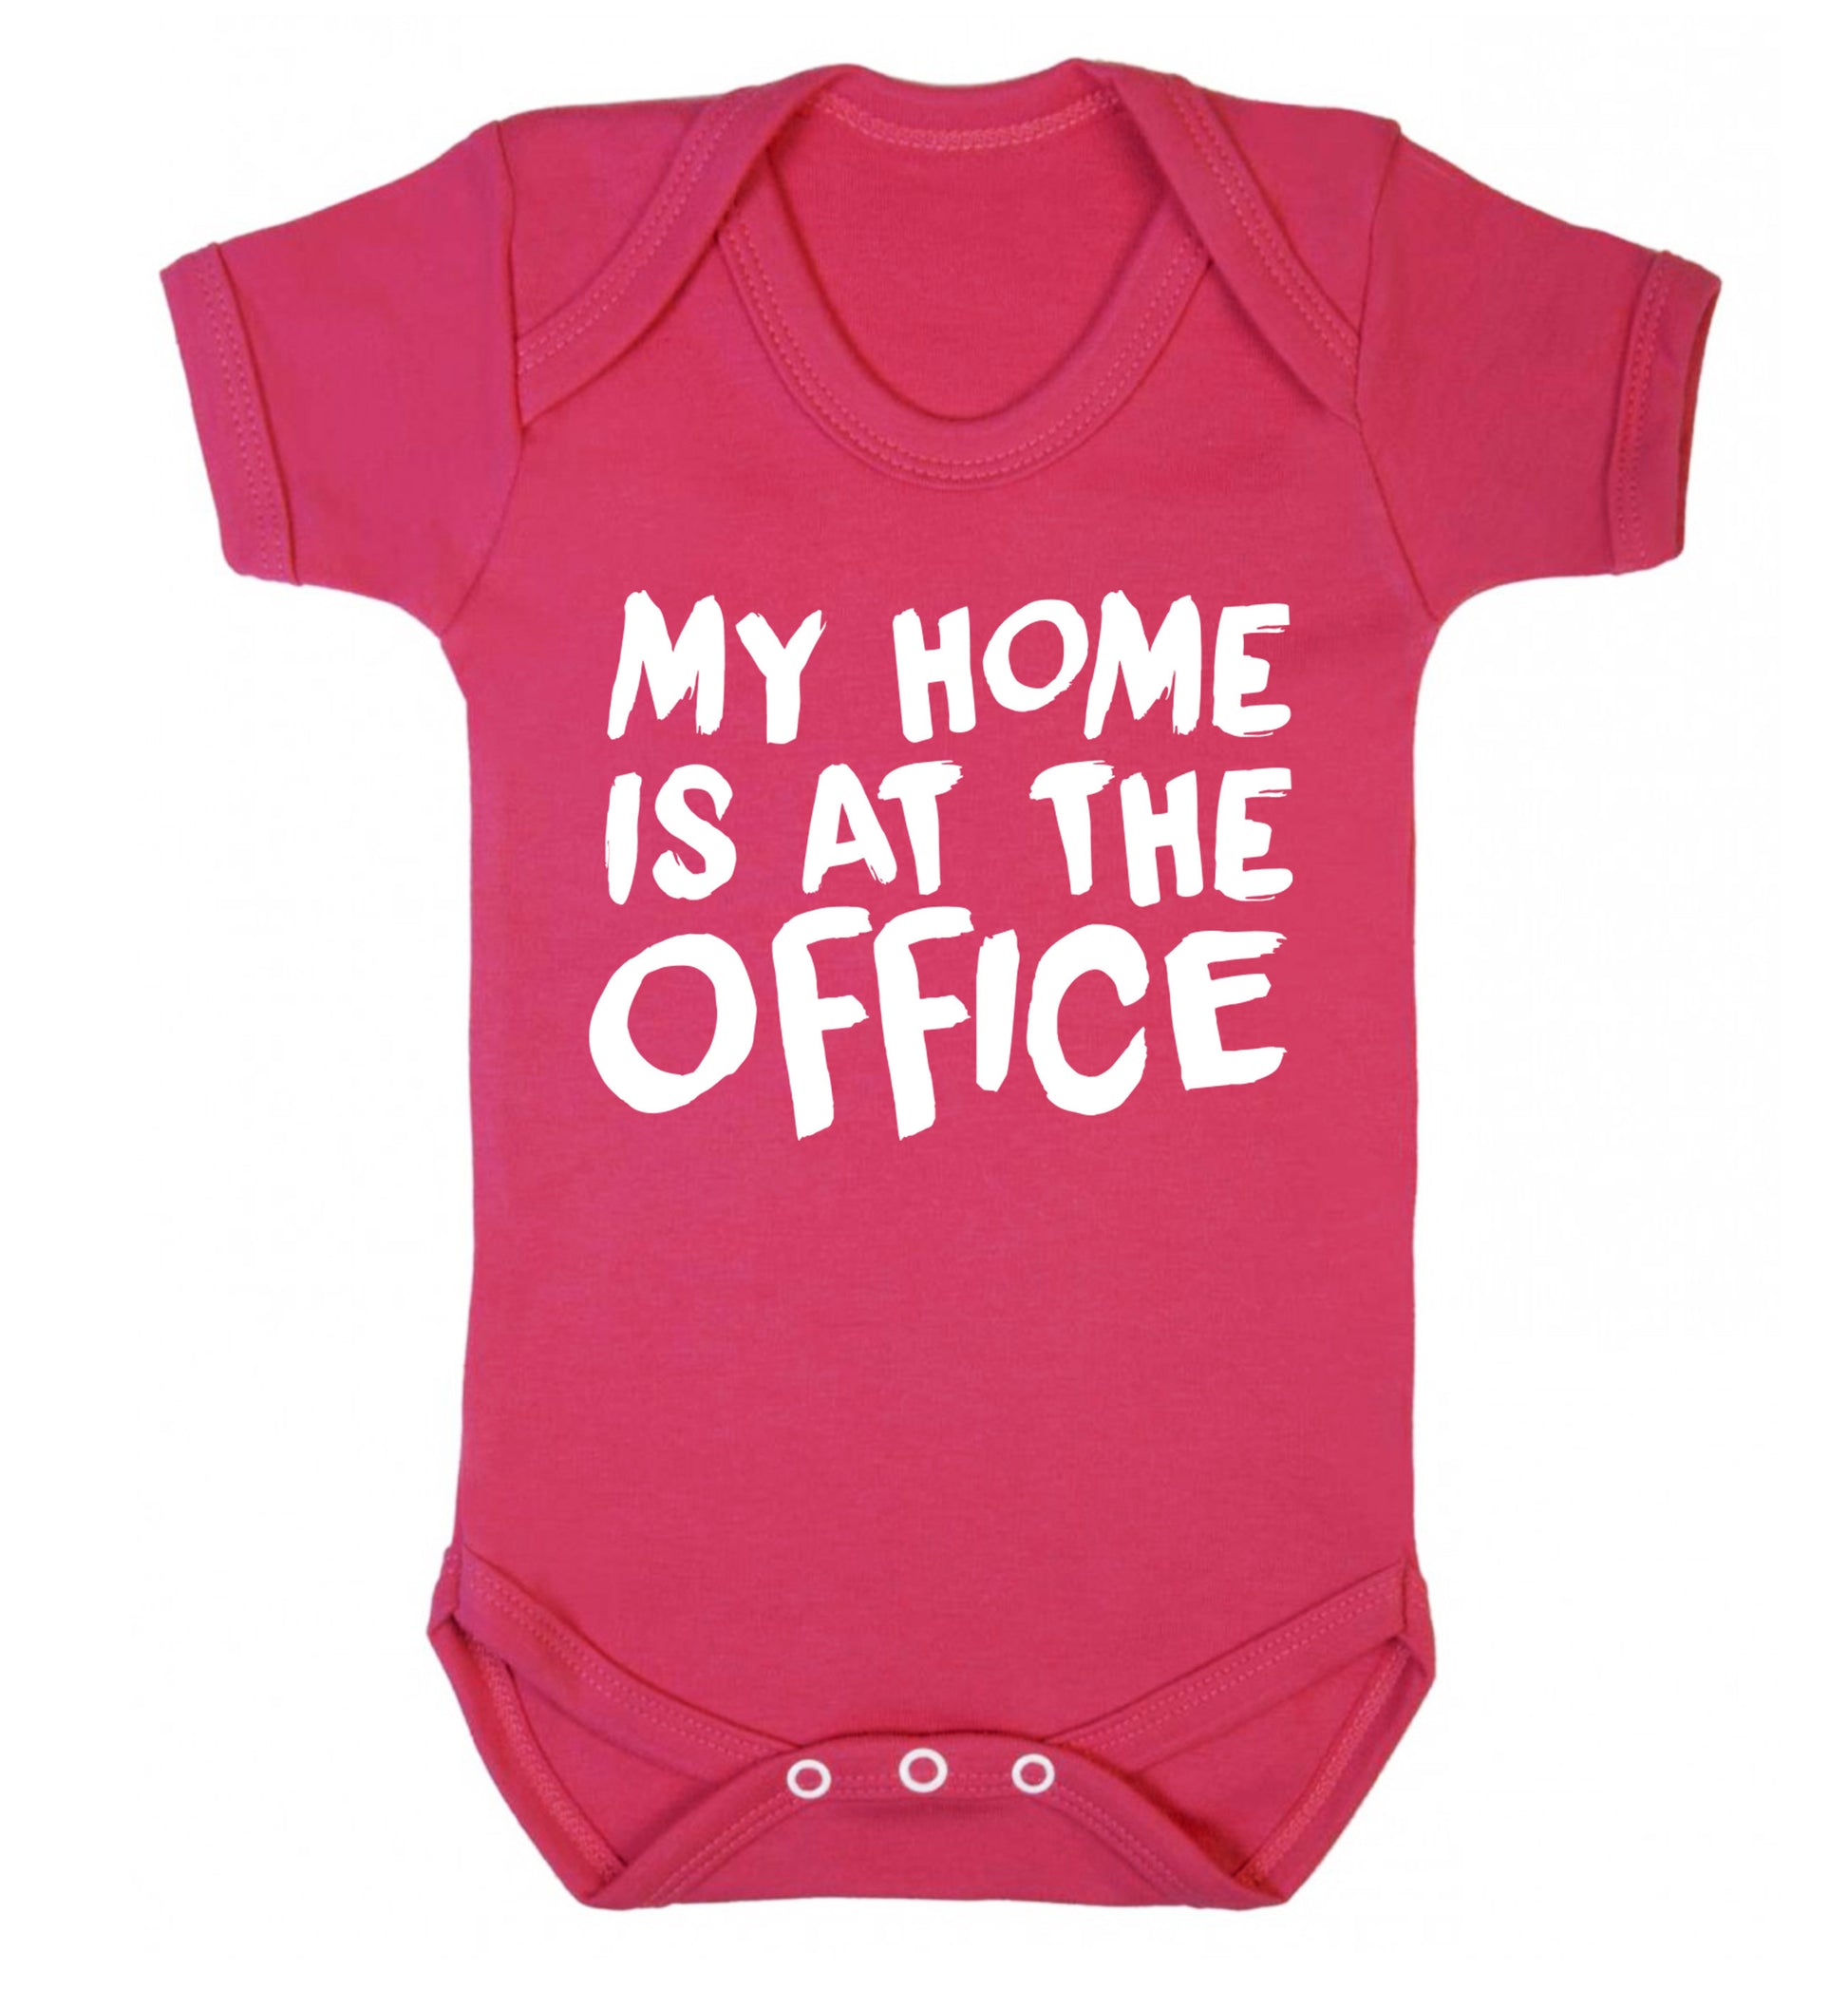 My home is at the office Baby Vest dark pink 18-24 months